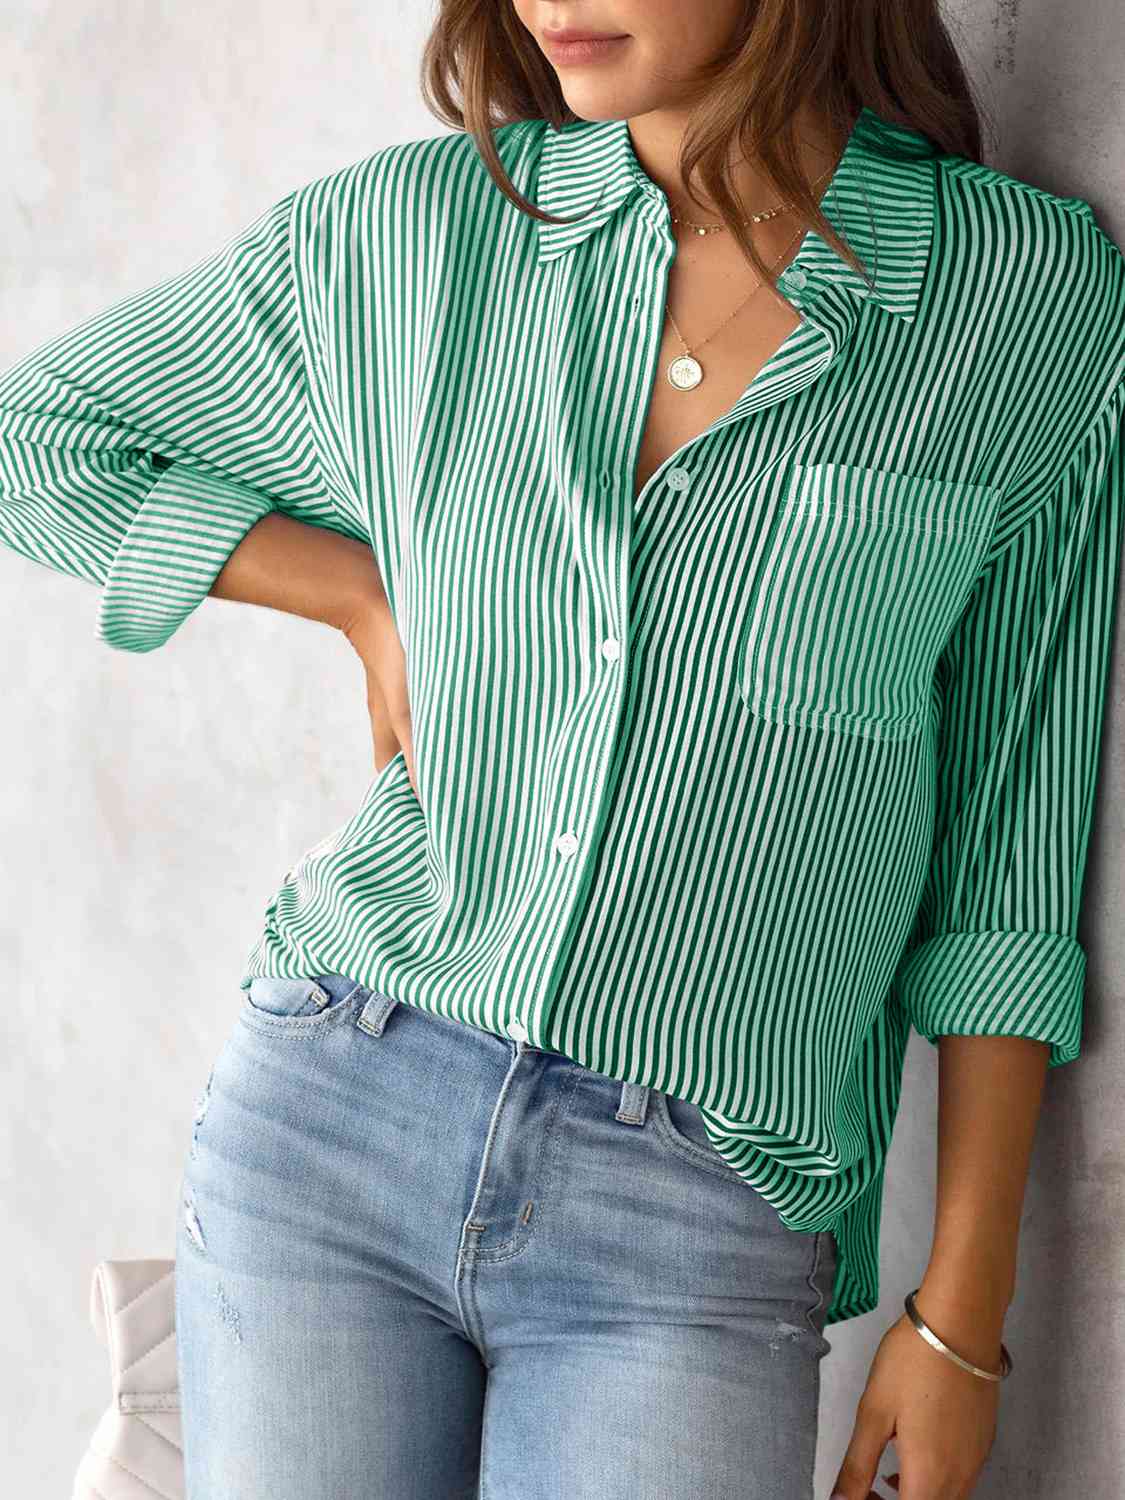 Striped Collared Neck Shirt with Pocket (5 Colors)  Krazy Heart Designs Boutique   